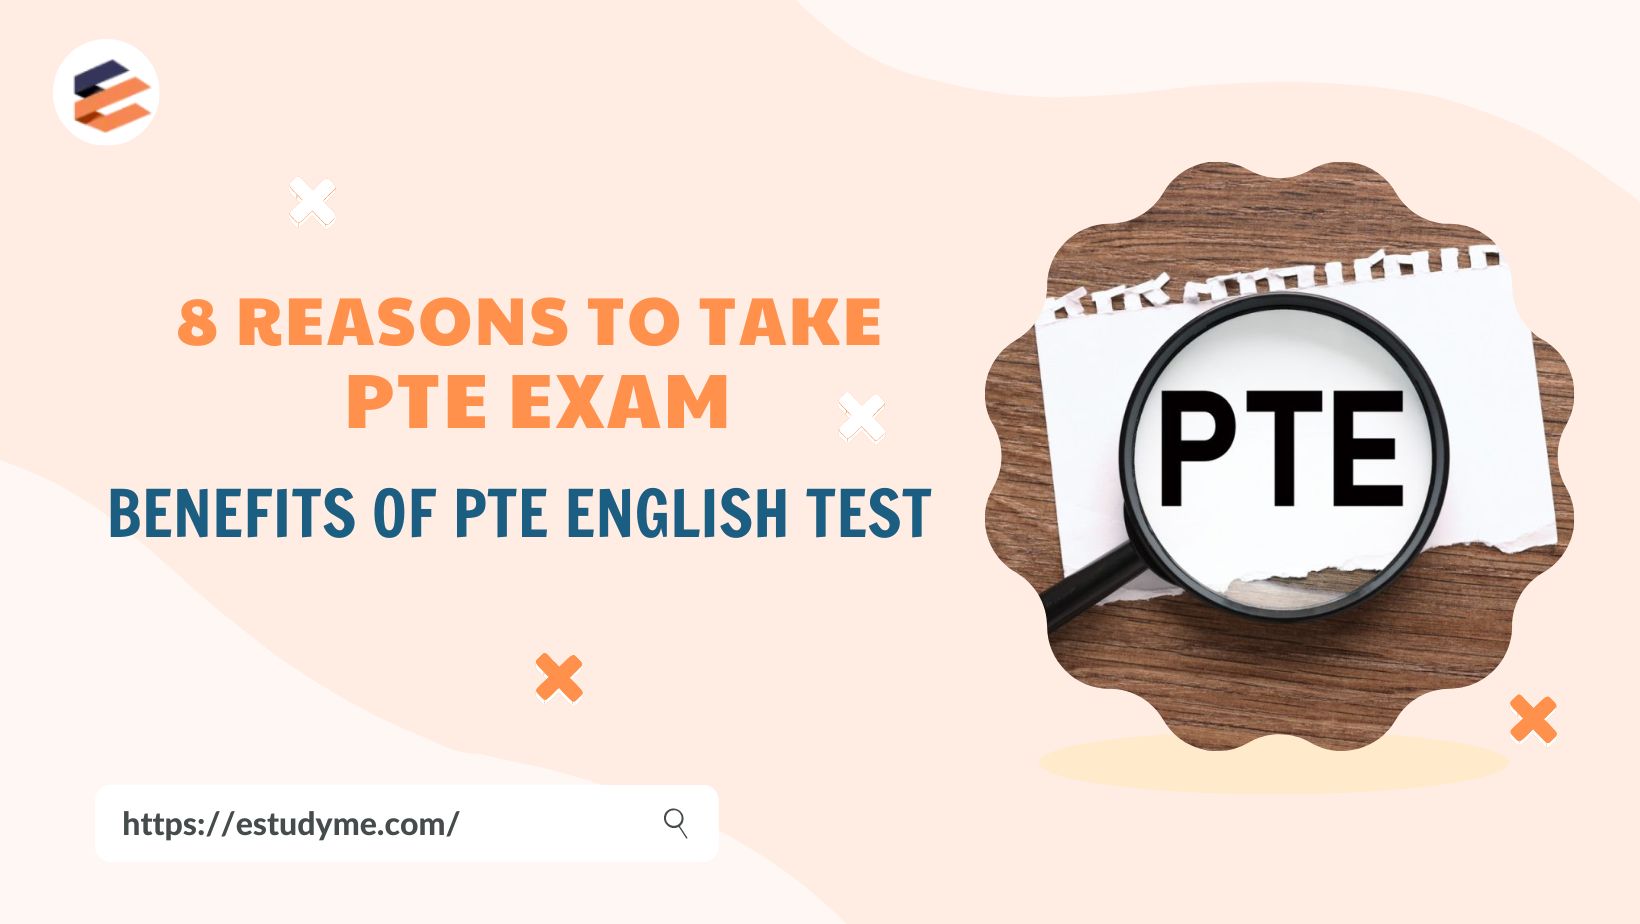 8 Reasons To Take PTE Exam - Benefits of PTE English Test